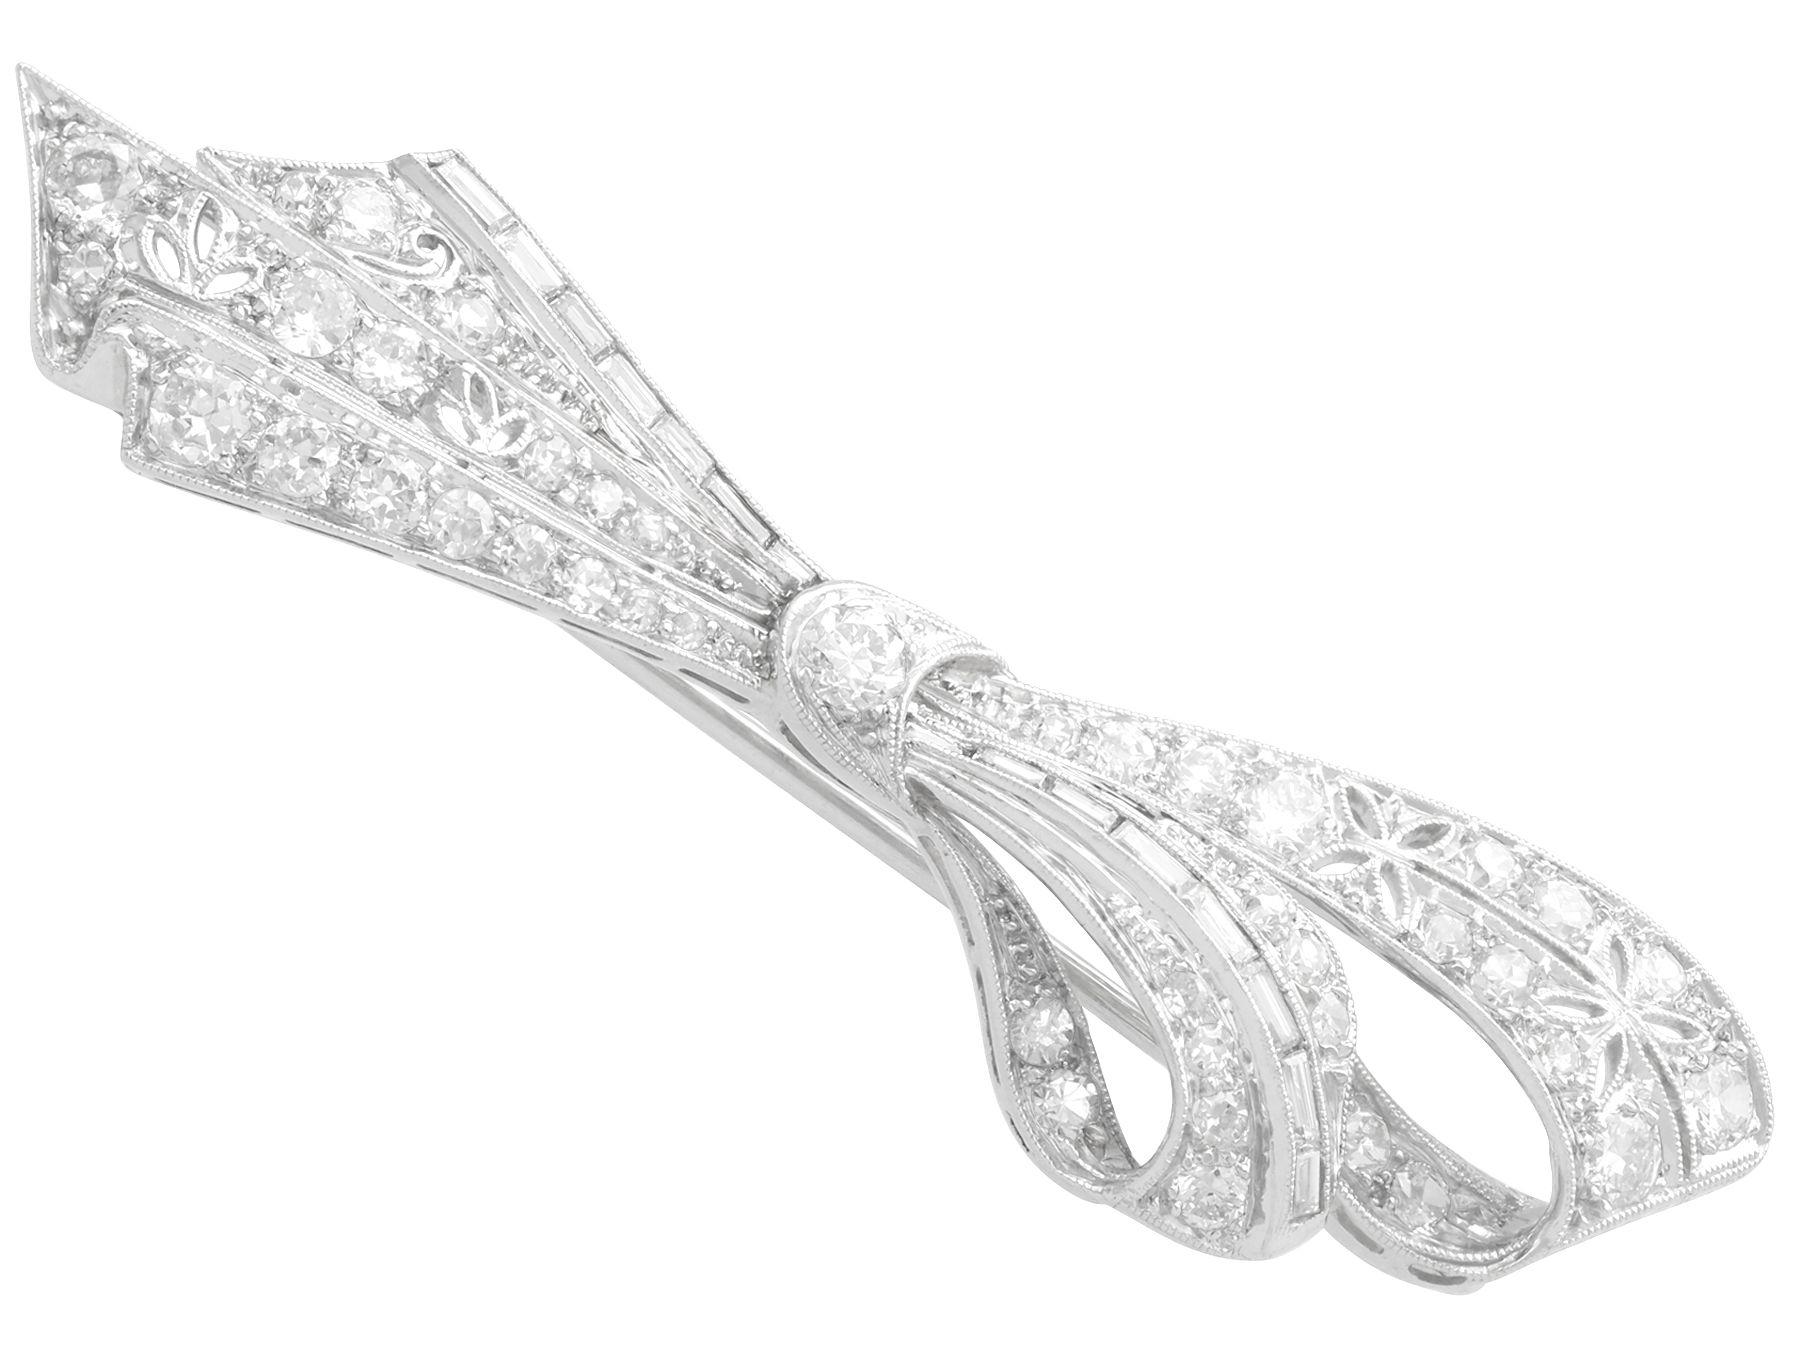 Antique 1.89 Carat Diamond and Platinum Bow Brooch Circa 1930 In Excellent Condition For Sale In Jesmond, Newcastle Upon Tyne